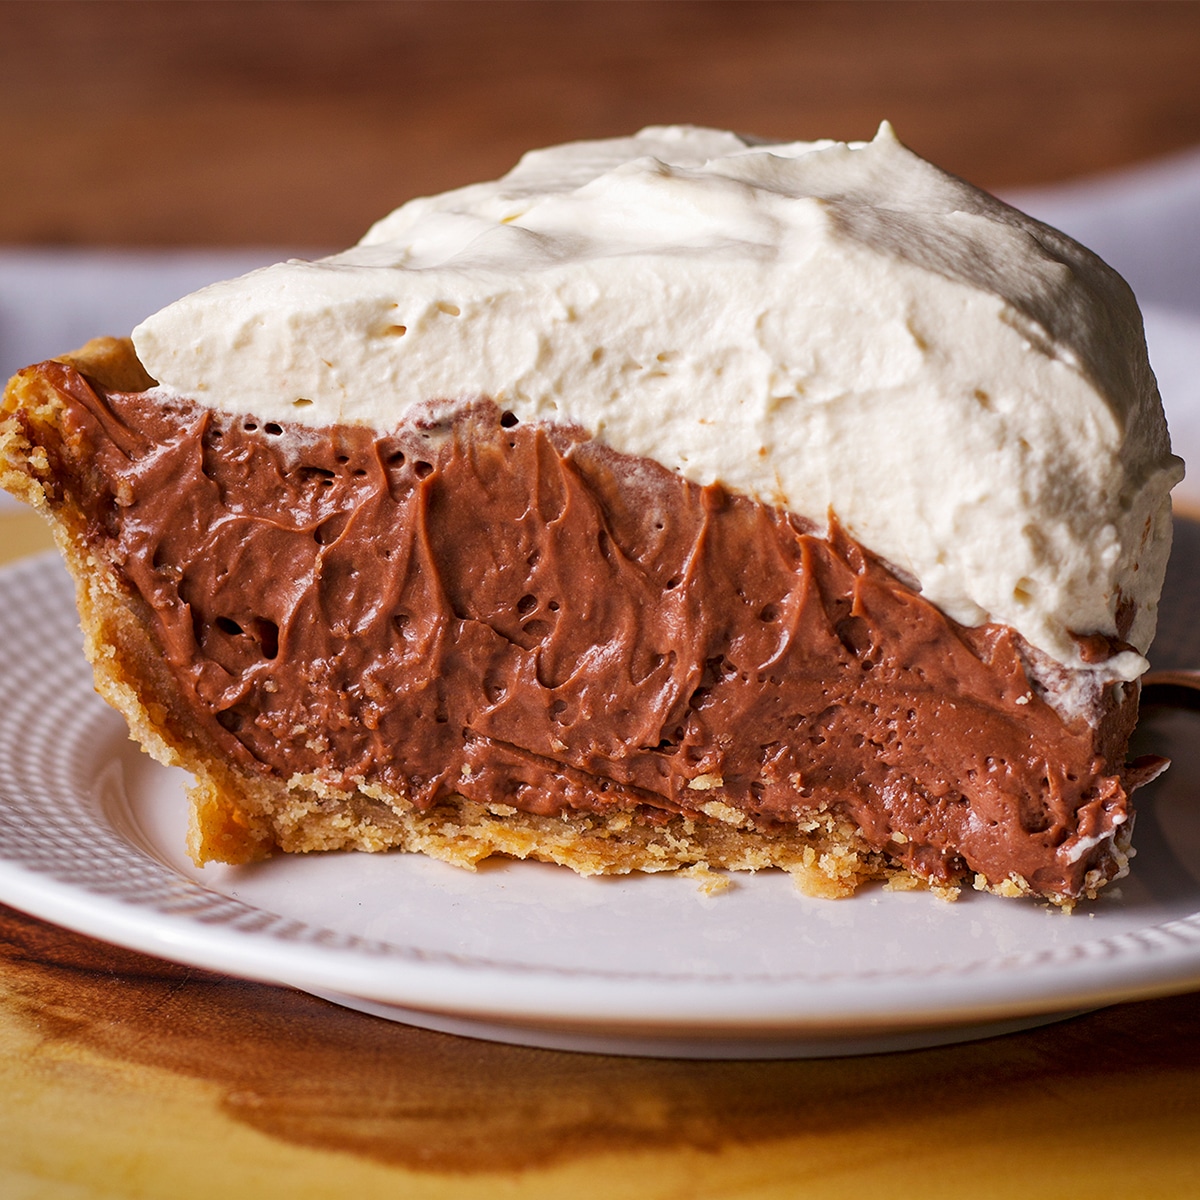 A slice of chocolate cream pie topped with whipped cream on a white plate.